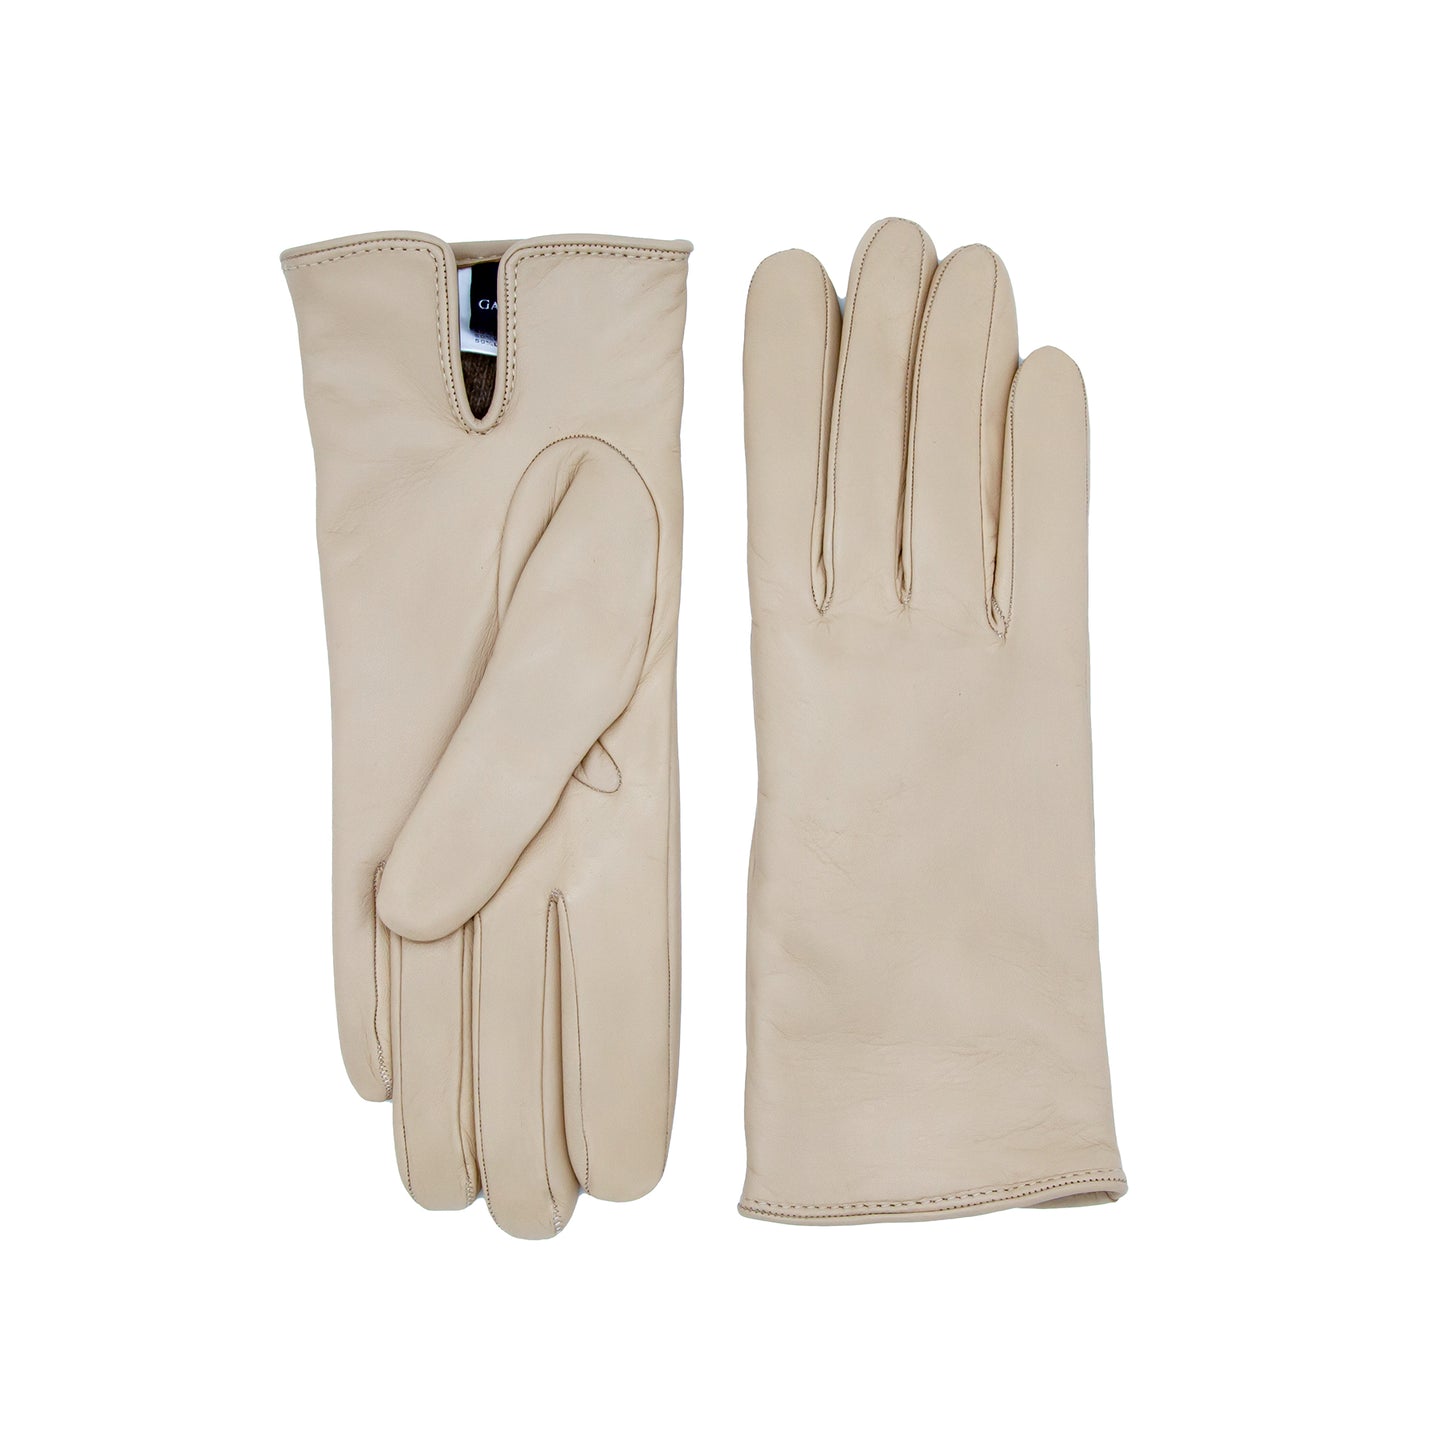 Women’s basic beige soft nappa leather gloves with palm opening and mix cashmere lining